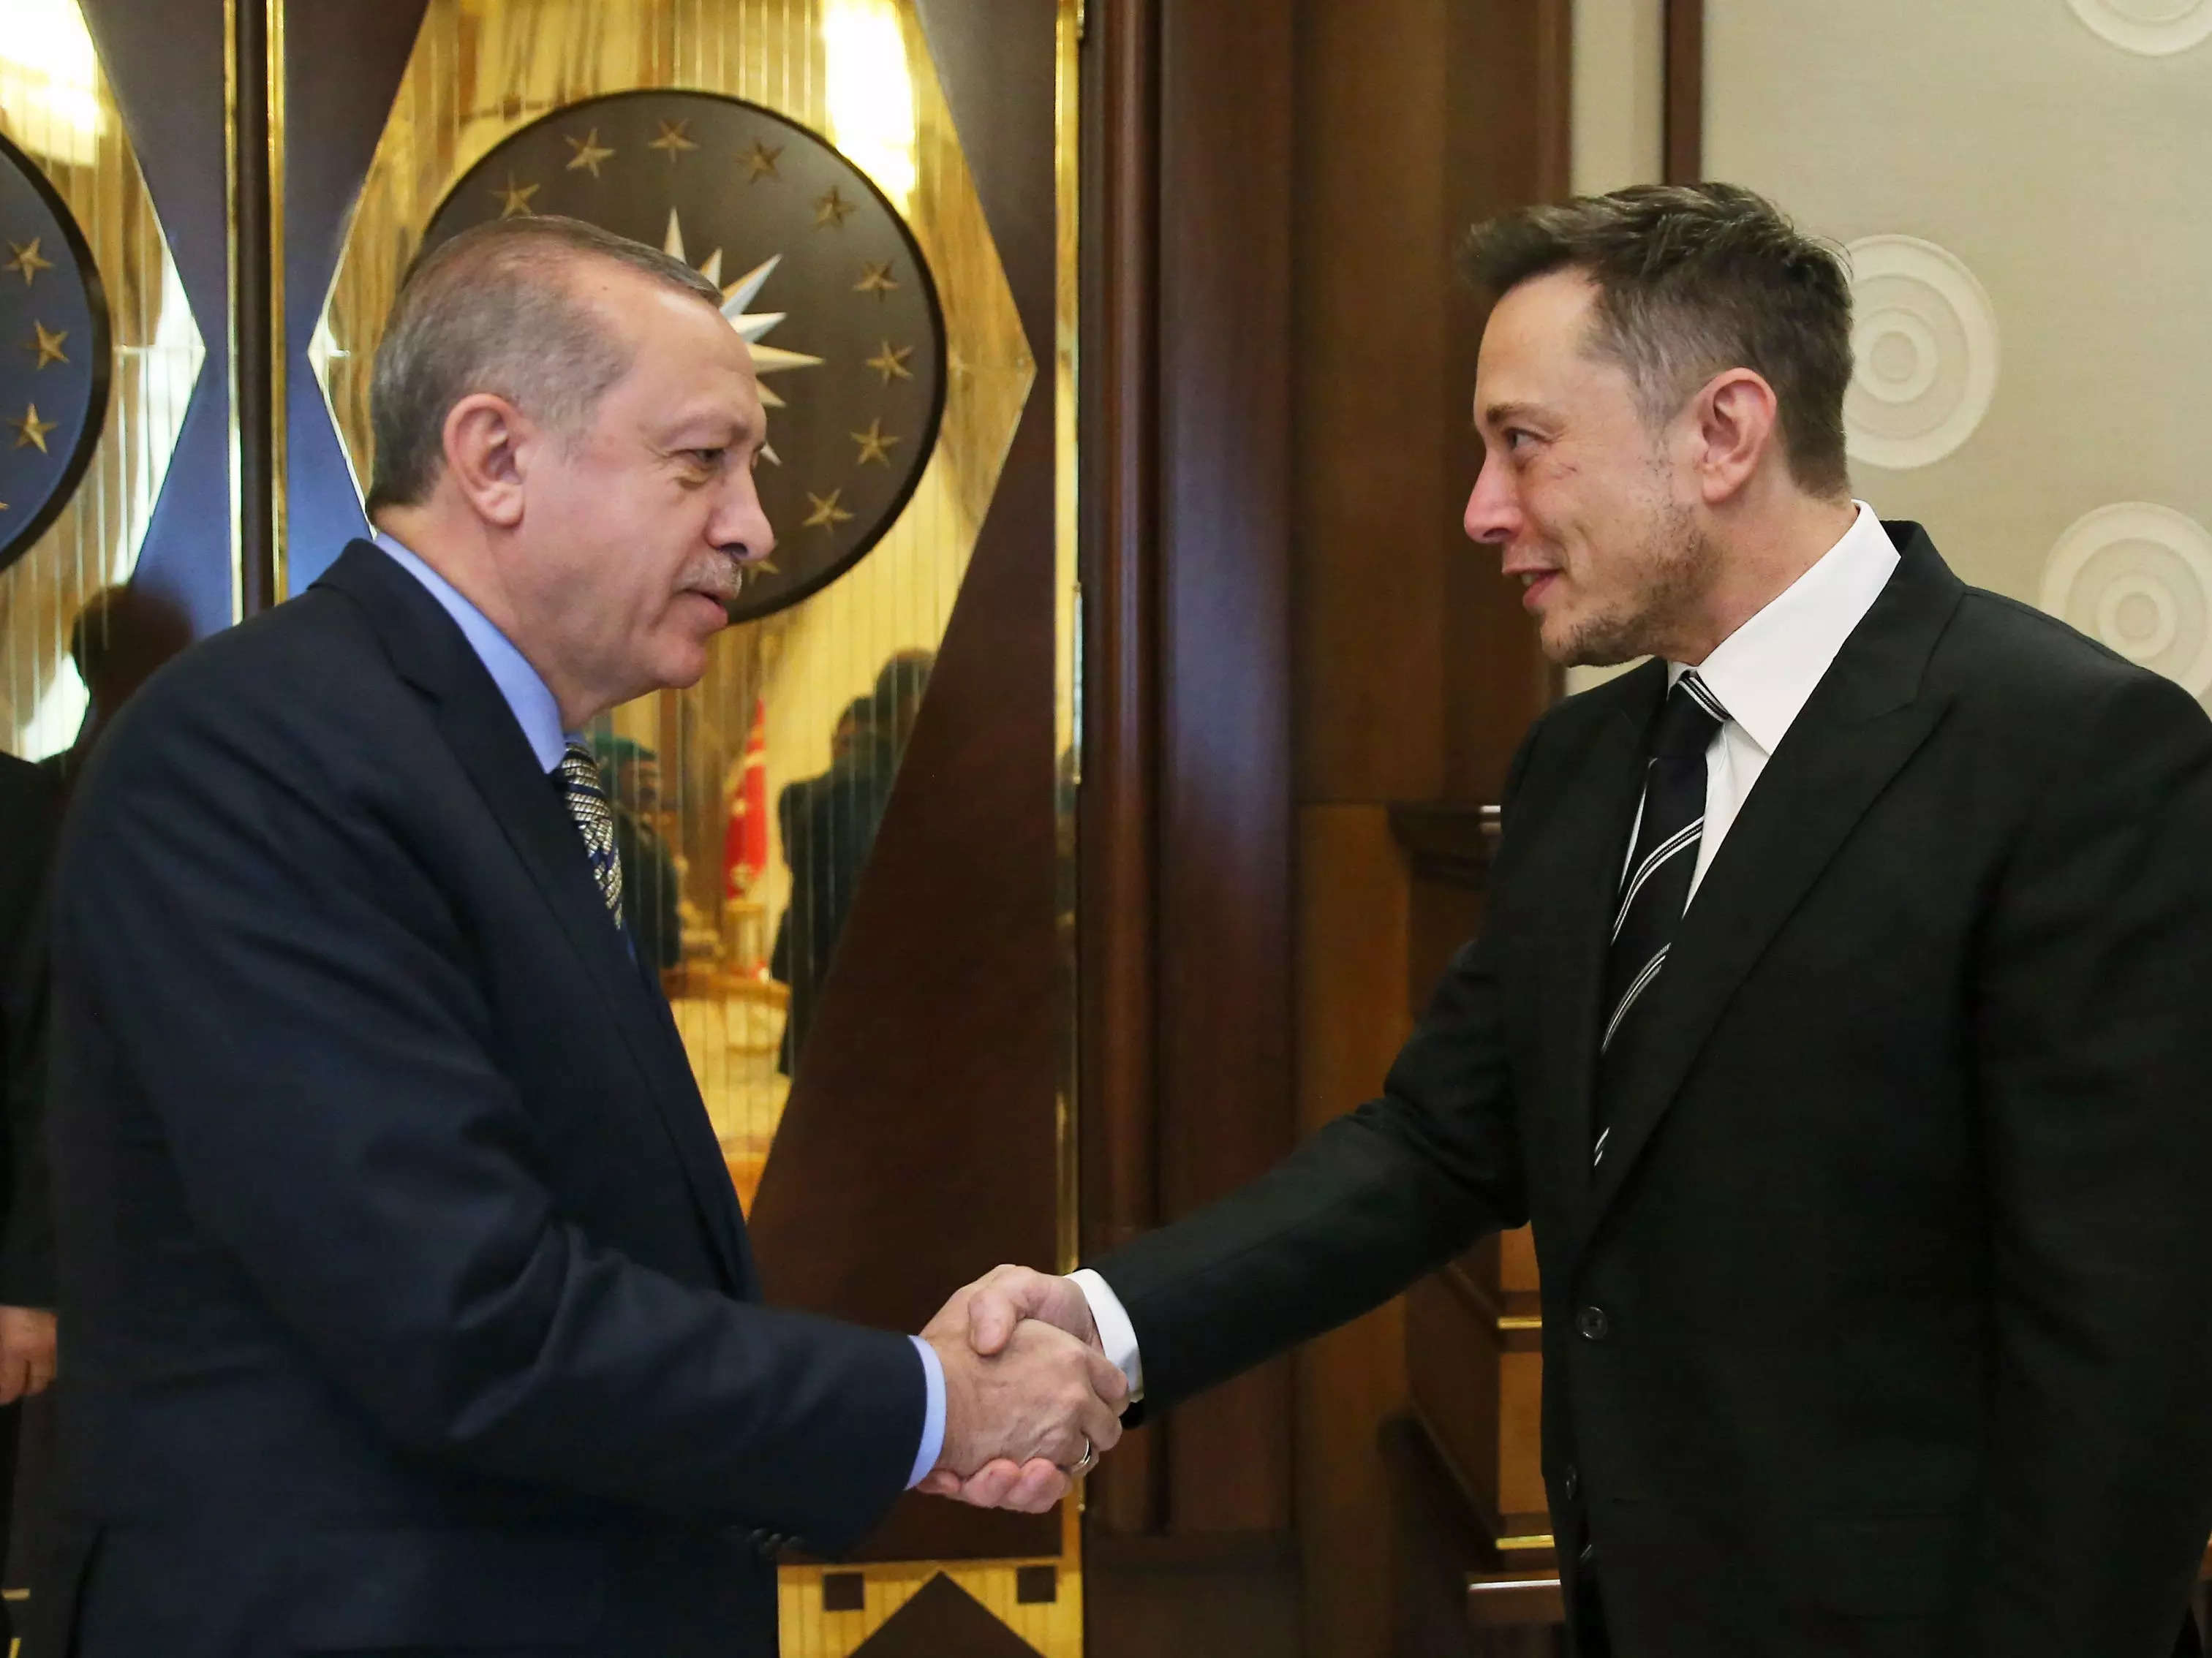 'Free speech opportunist' Elon Musk caved to government pressure to censor tweets ahead of the Turkish election. Critics argue SpaceX dealings with the country's right-wing leader may have caused the reversal.